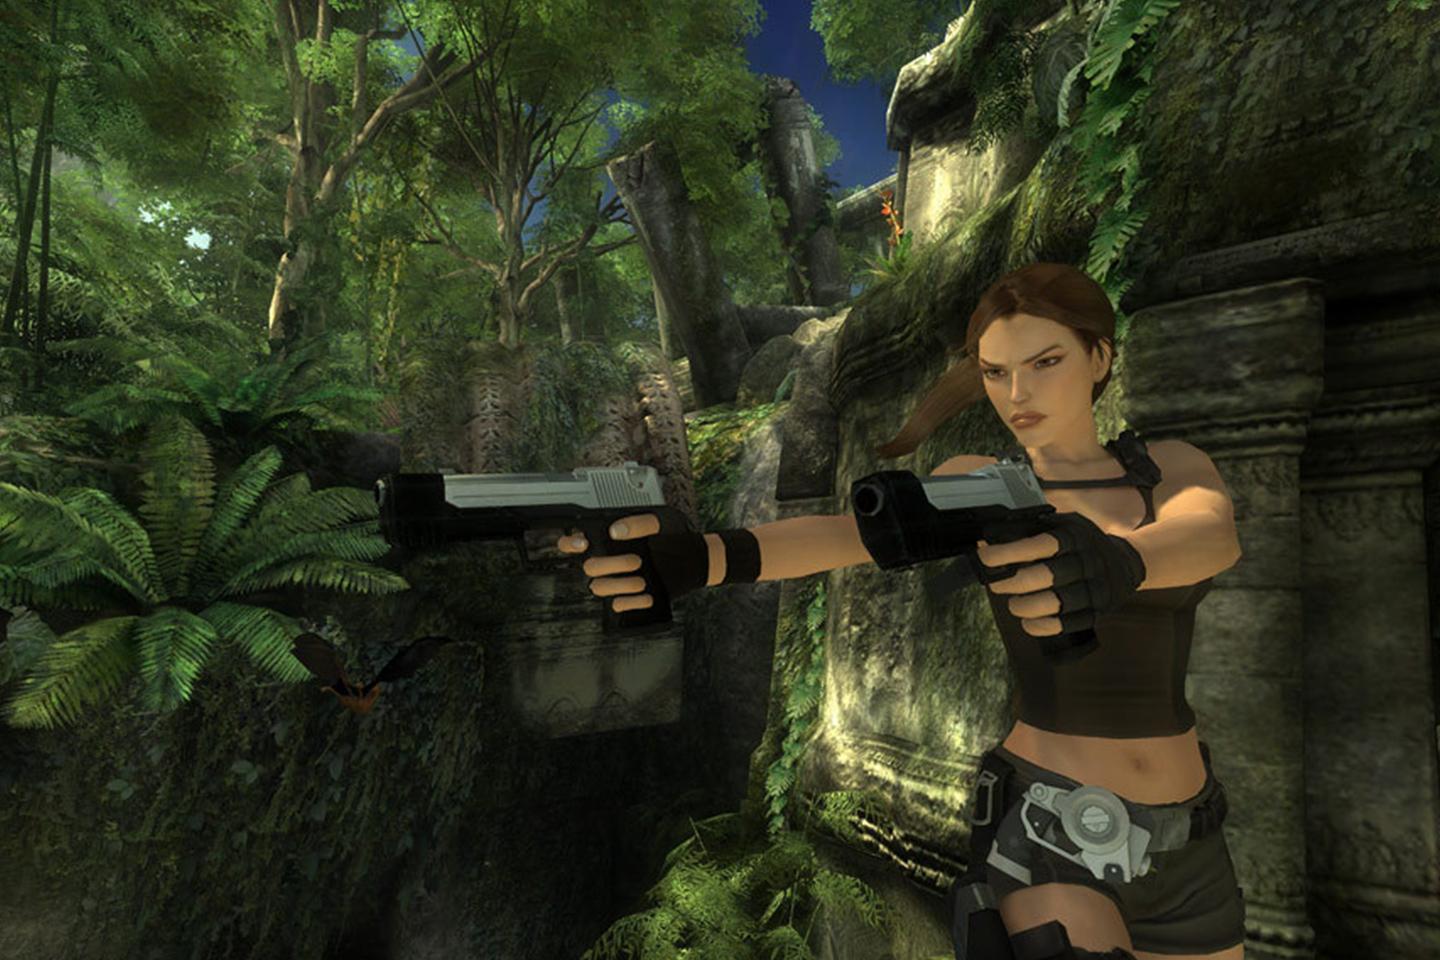 Lara holding two guns near tomb wall in mossy forest.